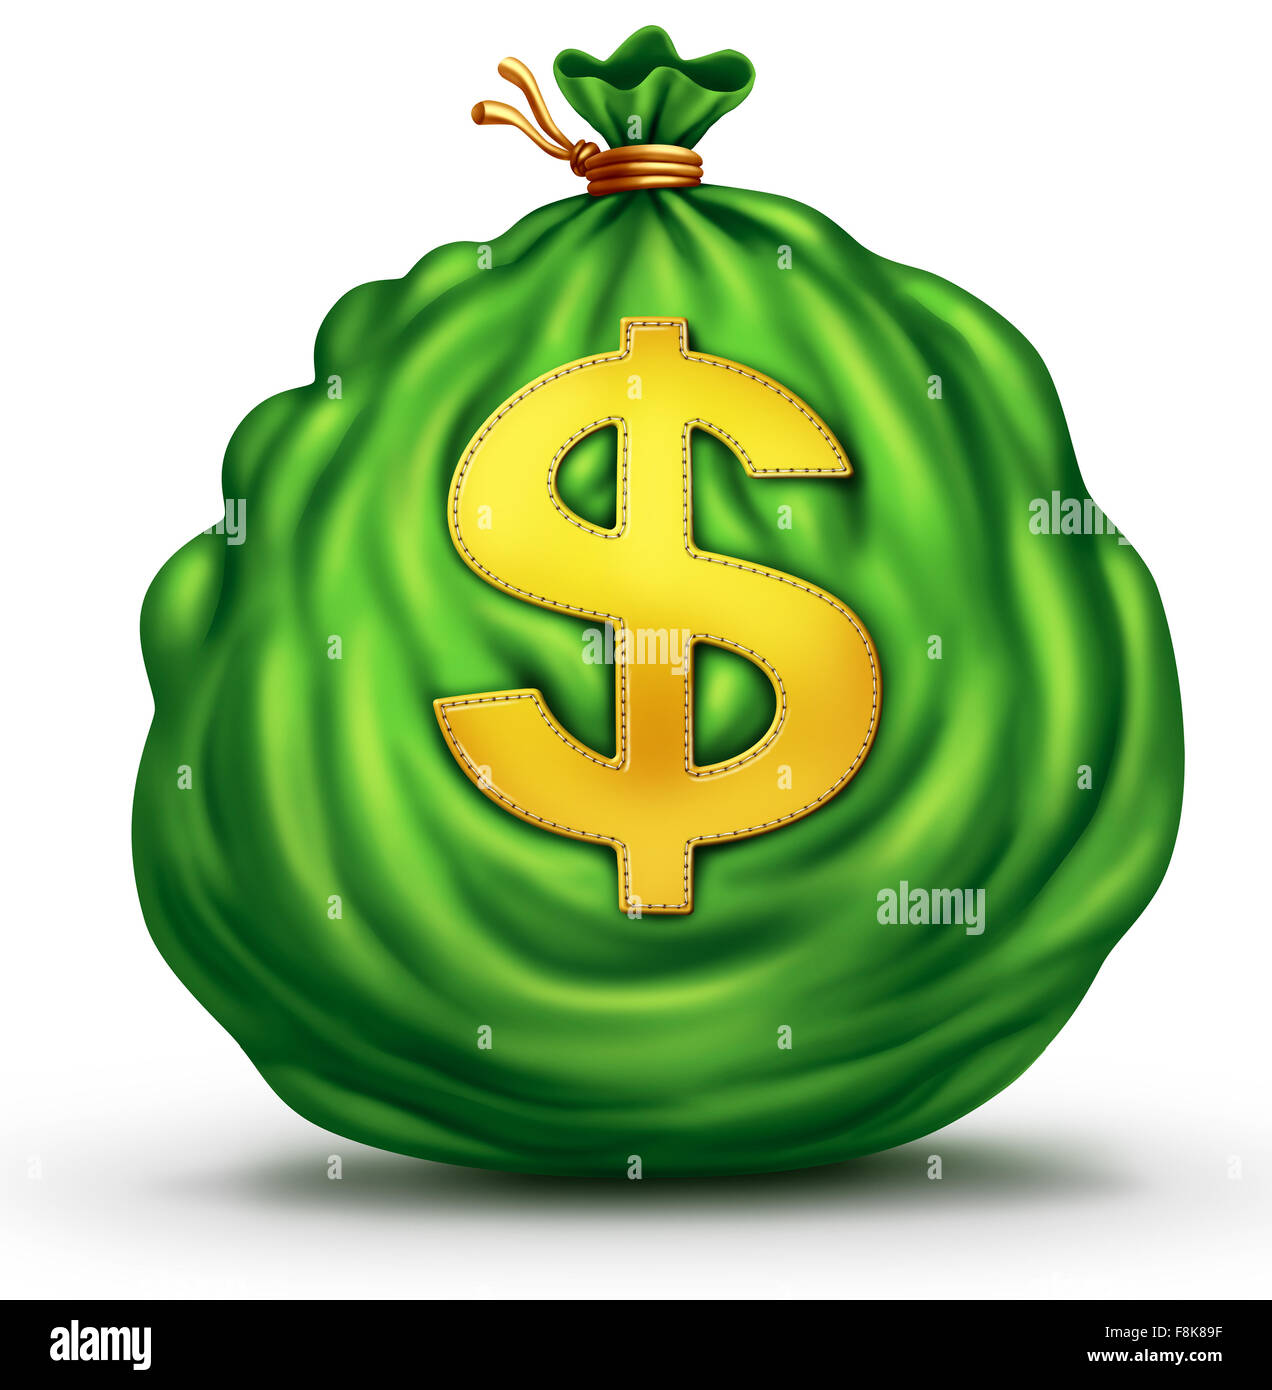 Money bag financial business object as a big green sack of currency with a dollar symbol stitched to the finance icon on a white background as a success winning prize metaphor. Stock Photo